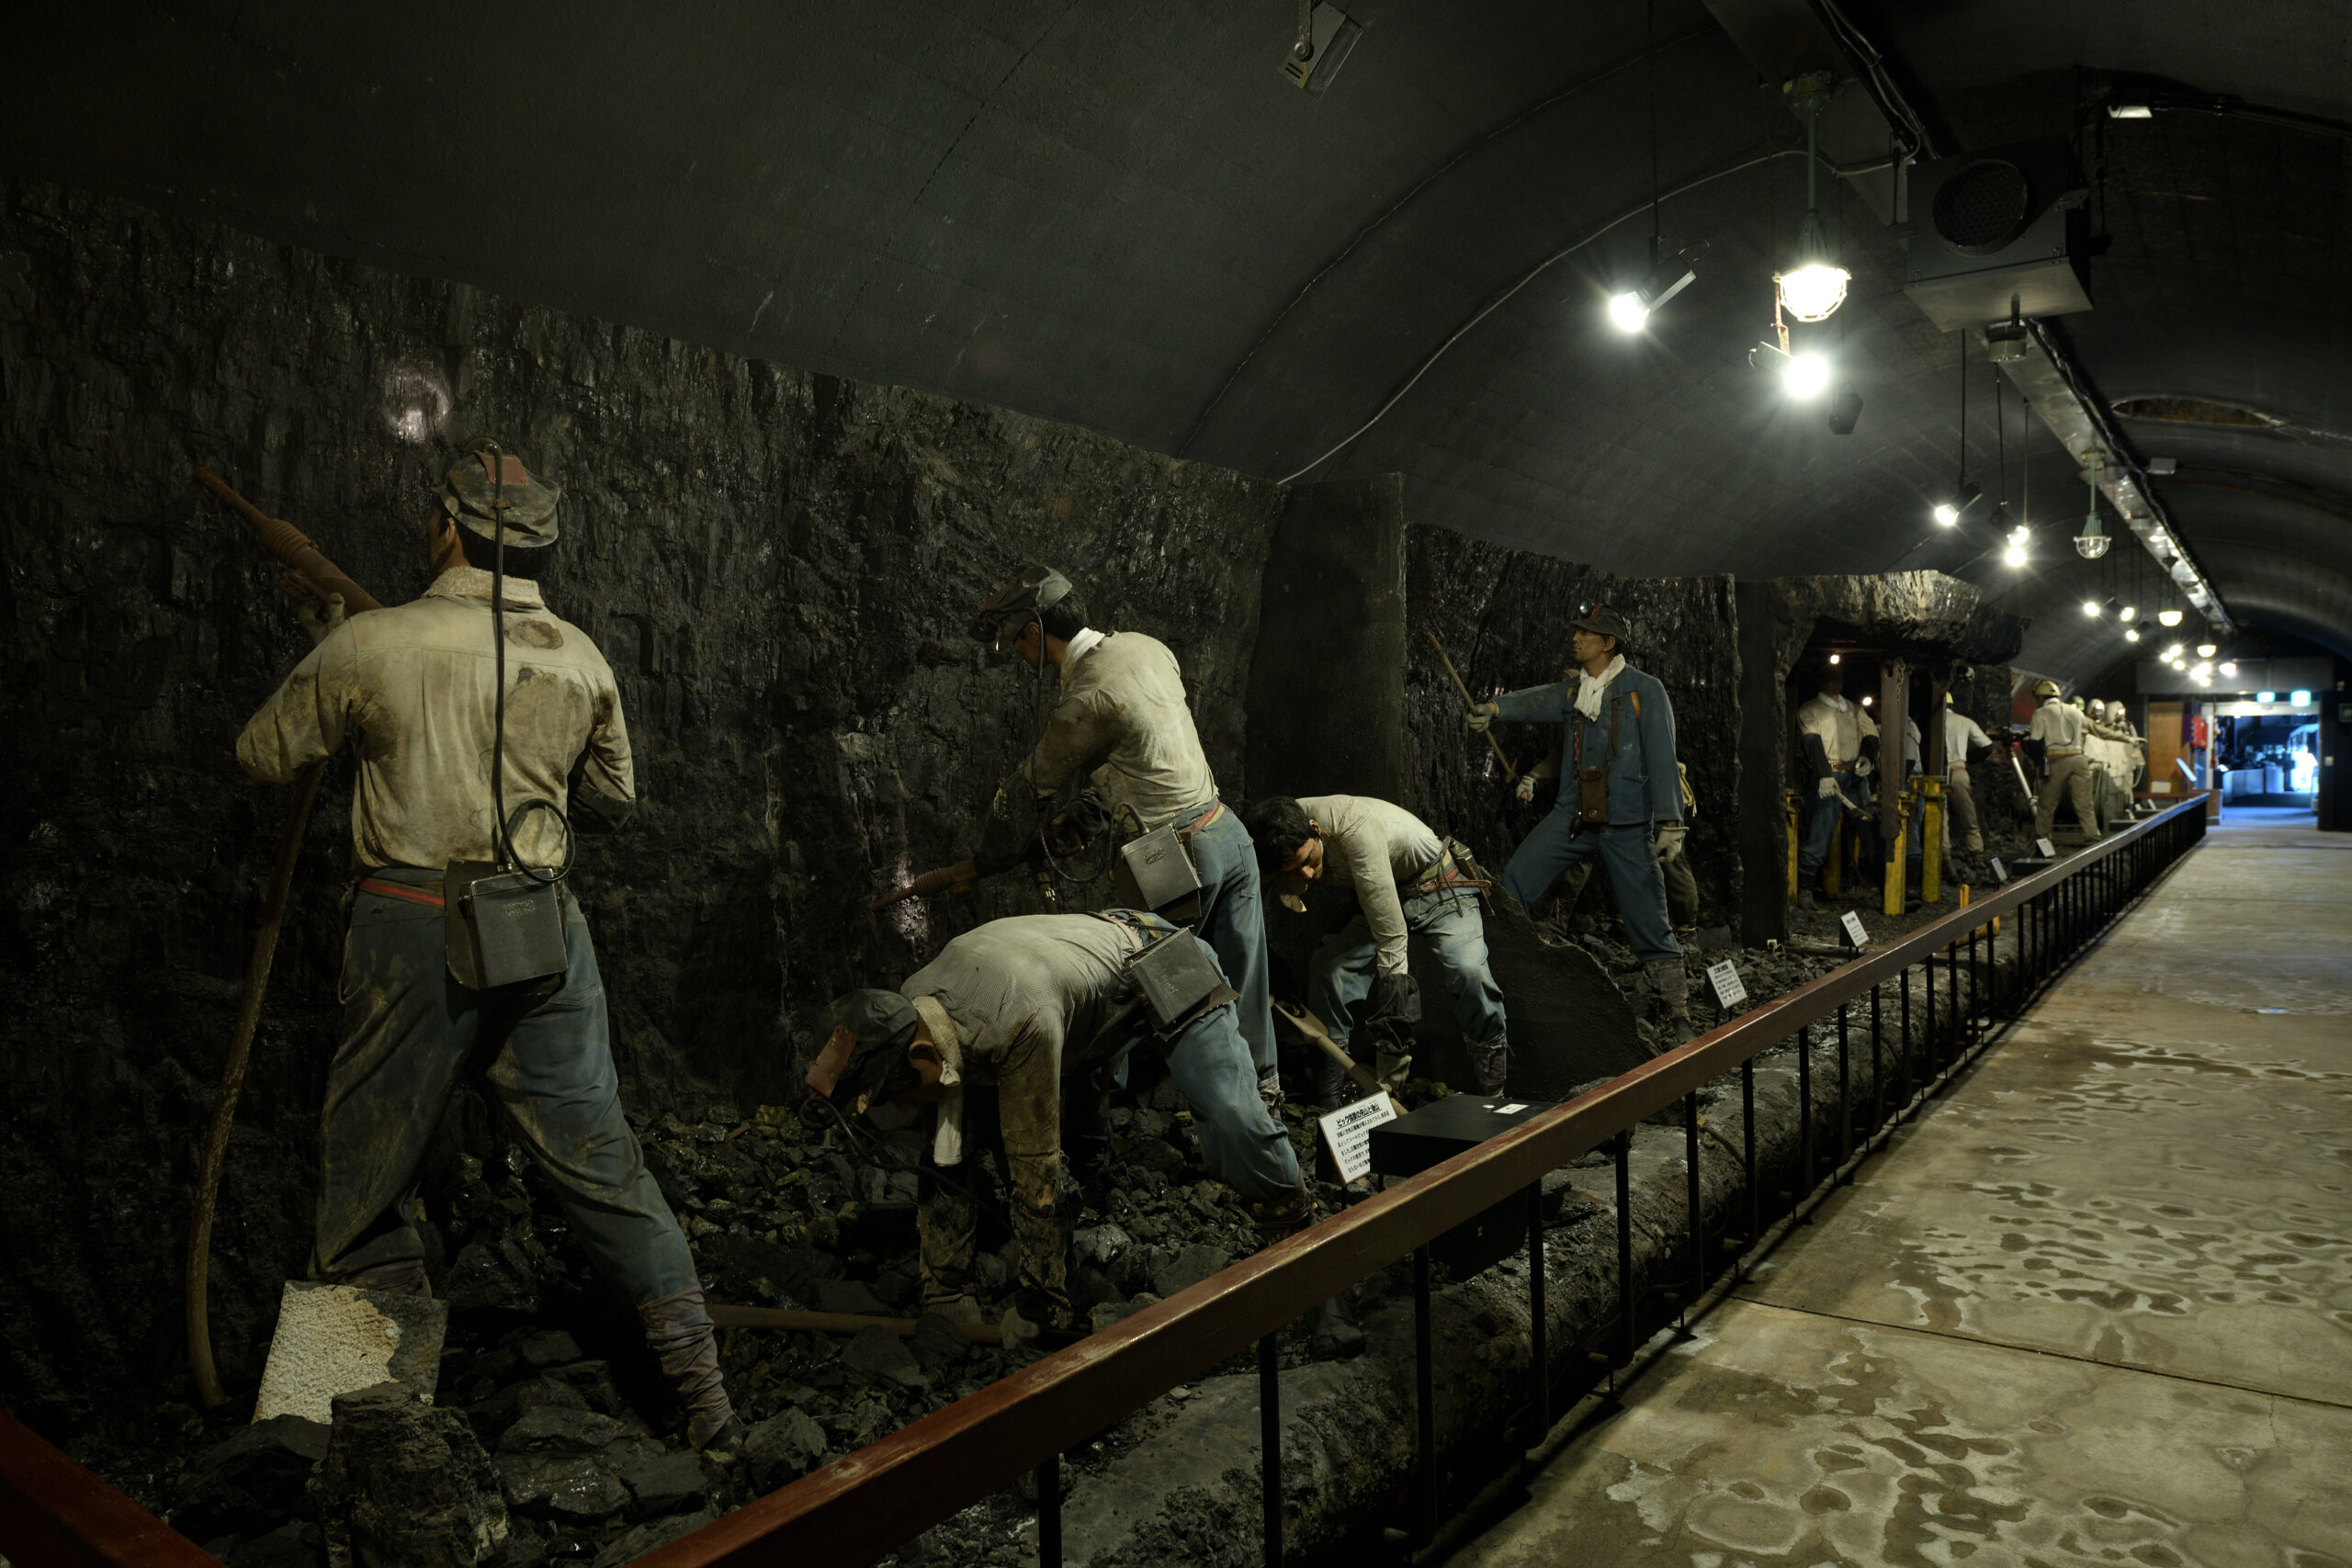 Explore the Deep History of Japan’s Coal Mining in a Former Key Mining Town